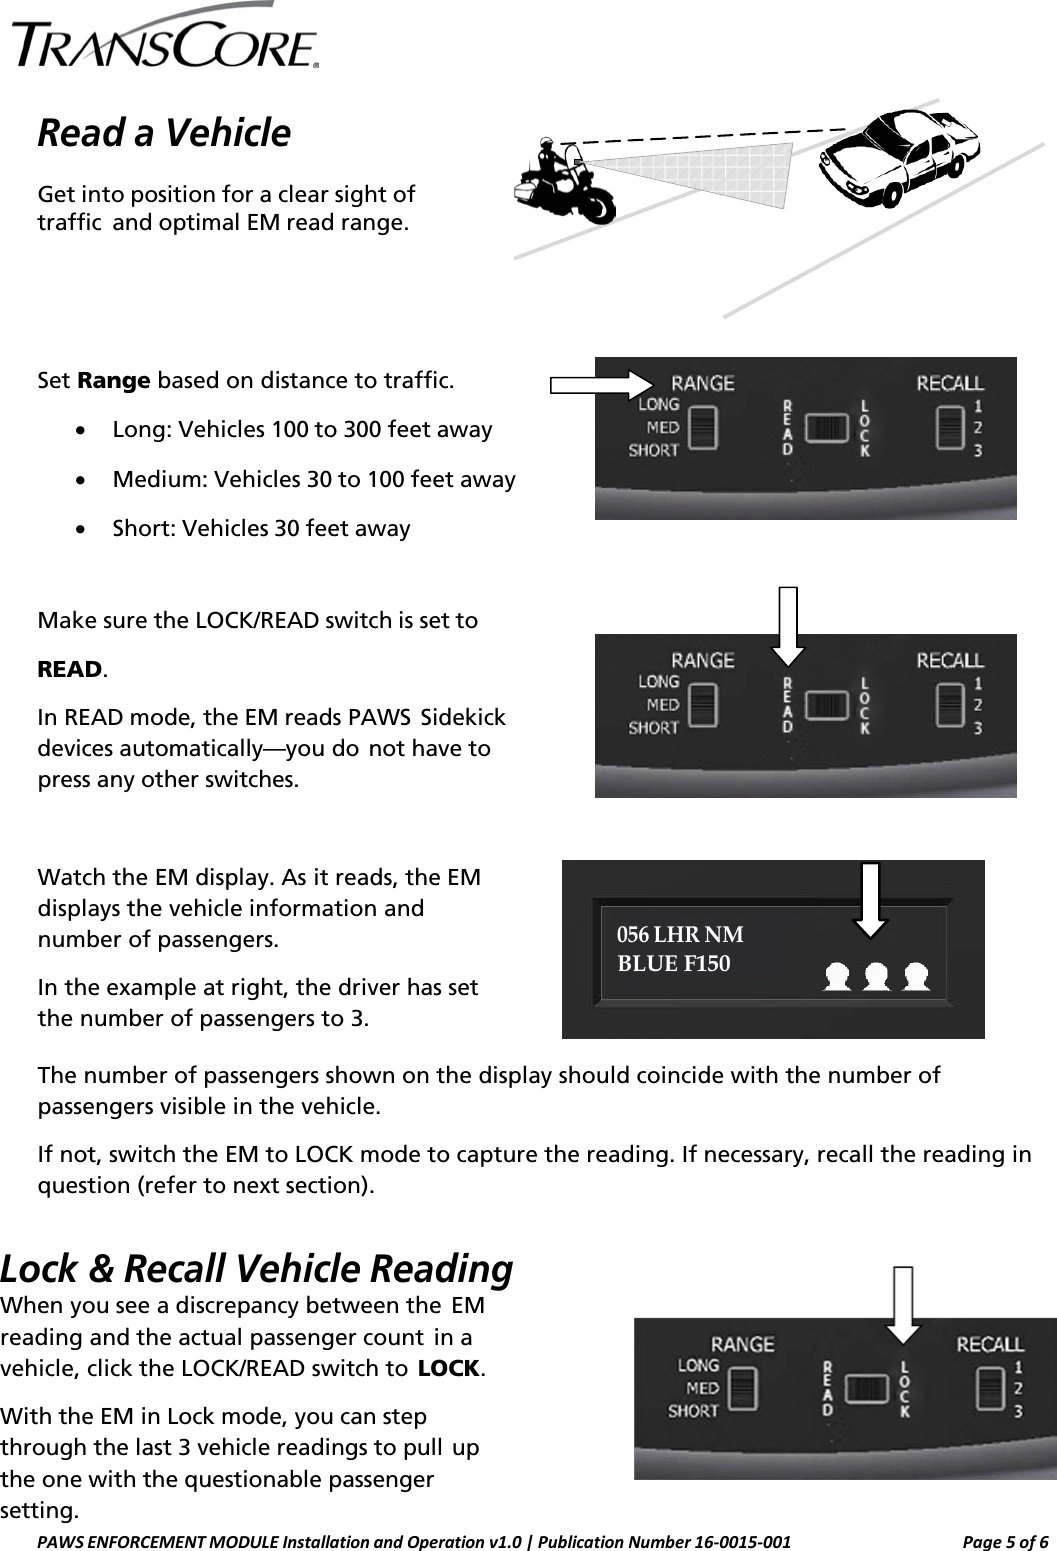    Read a Vehicle Get into position for a clear sight of traffic and optimal EM read range.      Set Range based on distance to traffic. • Long: Vehicles 100 to 300 feet away • Medium: Vehicles 30 to 100 feet away • Short: Vehicles 30 feet away   Make sure the LOCK/READ switch is set to READ.  In READ mode, the EM reads PAWS Sidekick devices automatically—you do not have to press any other switches.    Watch the EM display. As it reads, the EM displays the vehicle information and number of passengers. In the example at right, the driver has set the number of passengers to 3.   056 LHR NM BLUE F150 The number of passengers shown on the display should coincide with the number of passengers visible in the vehicle. If not, switch the EM to LOCK mode to capture the reading. If necessary, recall the reading in question (refer to next section).  Lock &amp; Recall Vehicle Reading When you see a discrepancy between the EM reading and the actual passenger count in a vehicle, click the LOCK/READ switch to LOCK. With the EM in Lock mode, you can step through the last 3 vehicle readings to pull up the one with the questionable passenger setting. PAWS ENFORCEMENT MODULE Installation and Operation v1.0 | Publication Number 16-0015-001 Page 5 of 6  